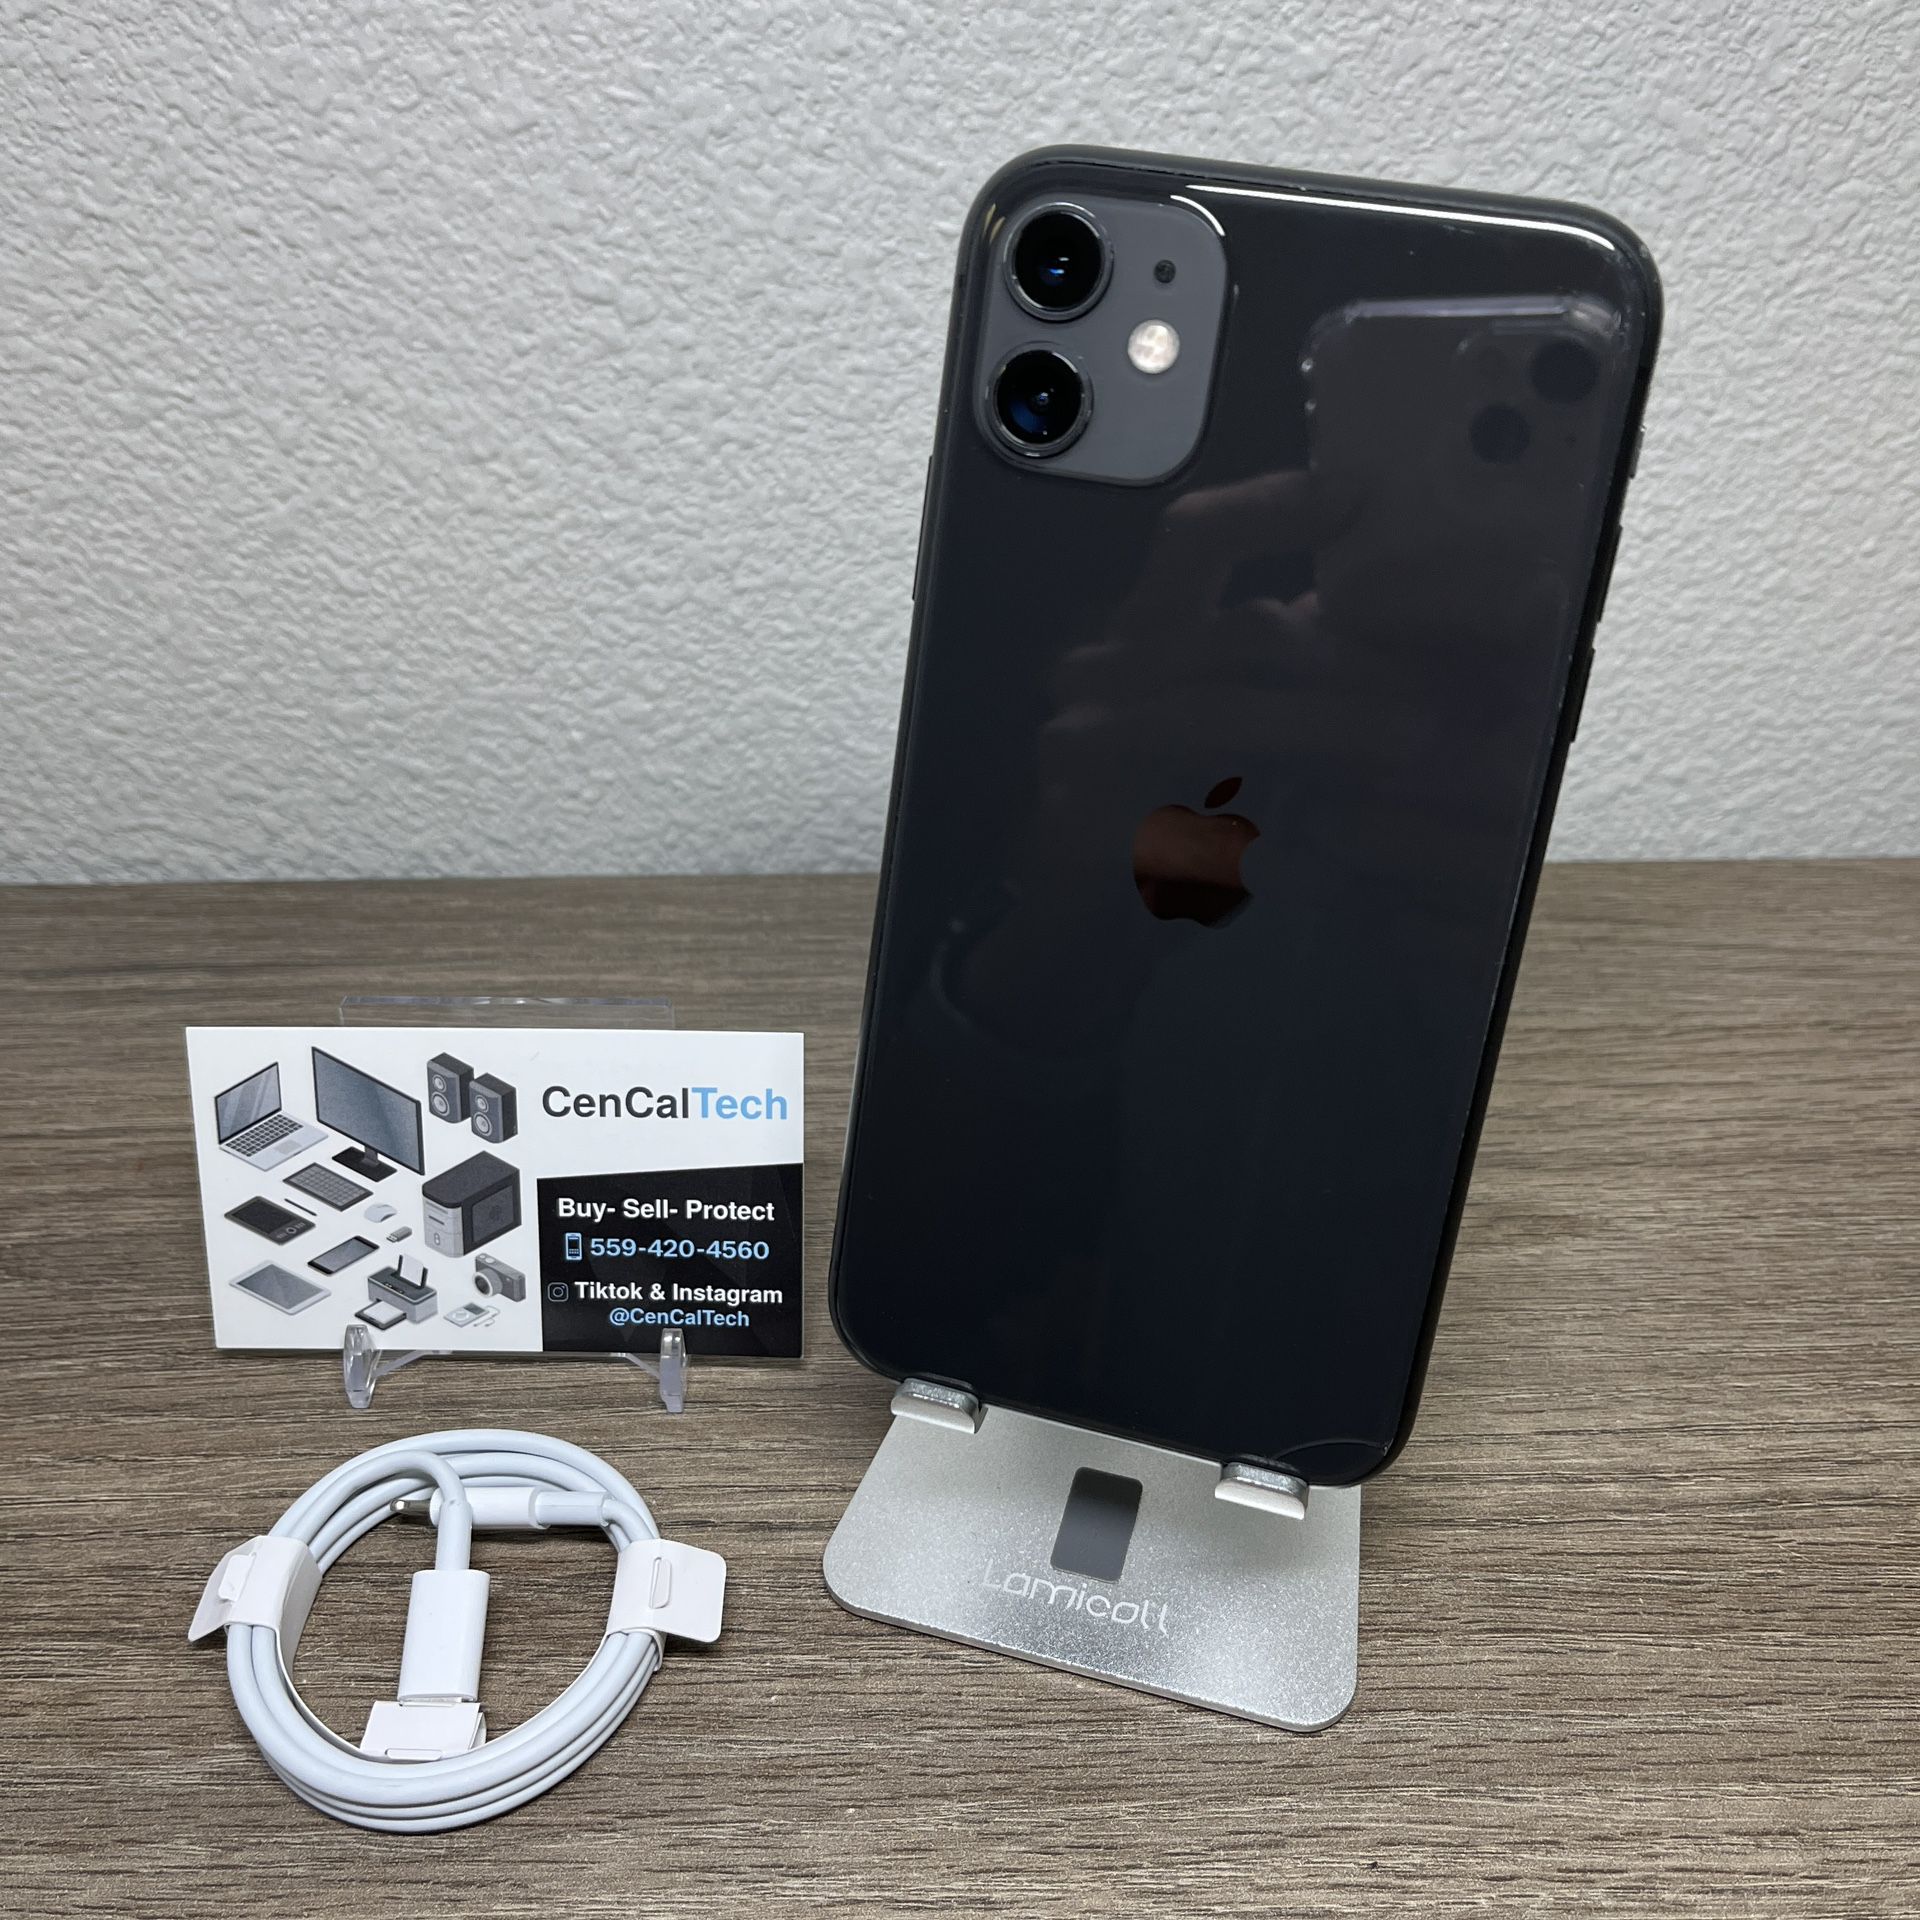 iPhone 11 64gb Unlocked For Any Carrier with 97% Battery Health screen has crack on corner